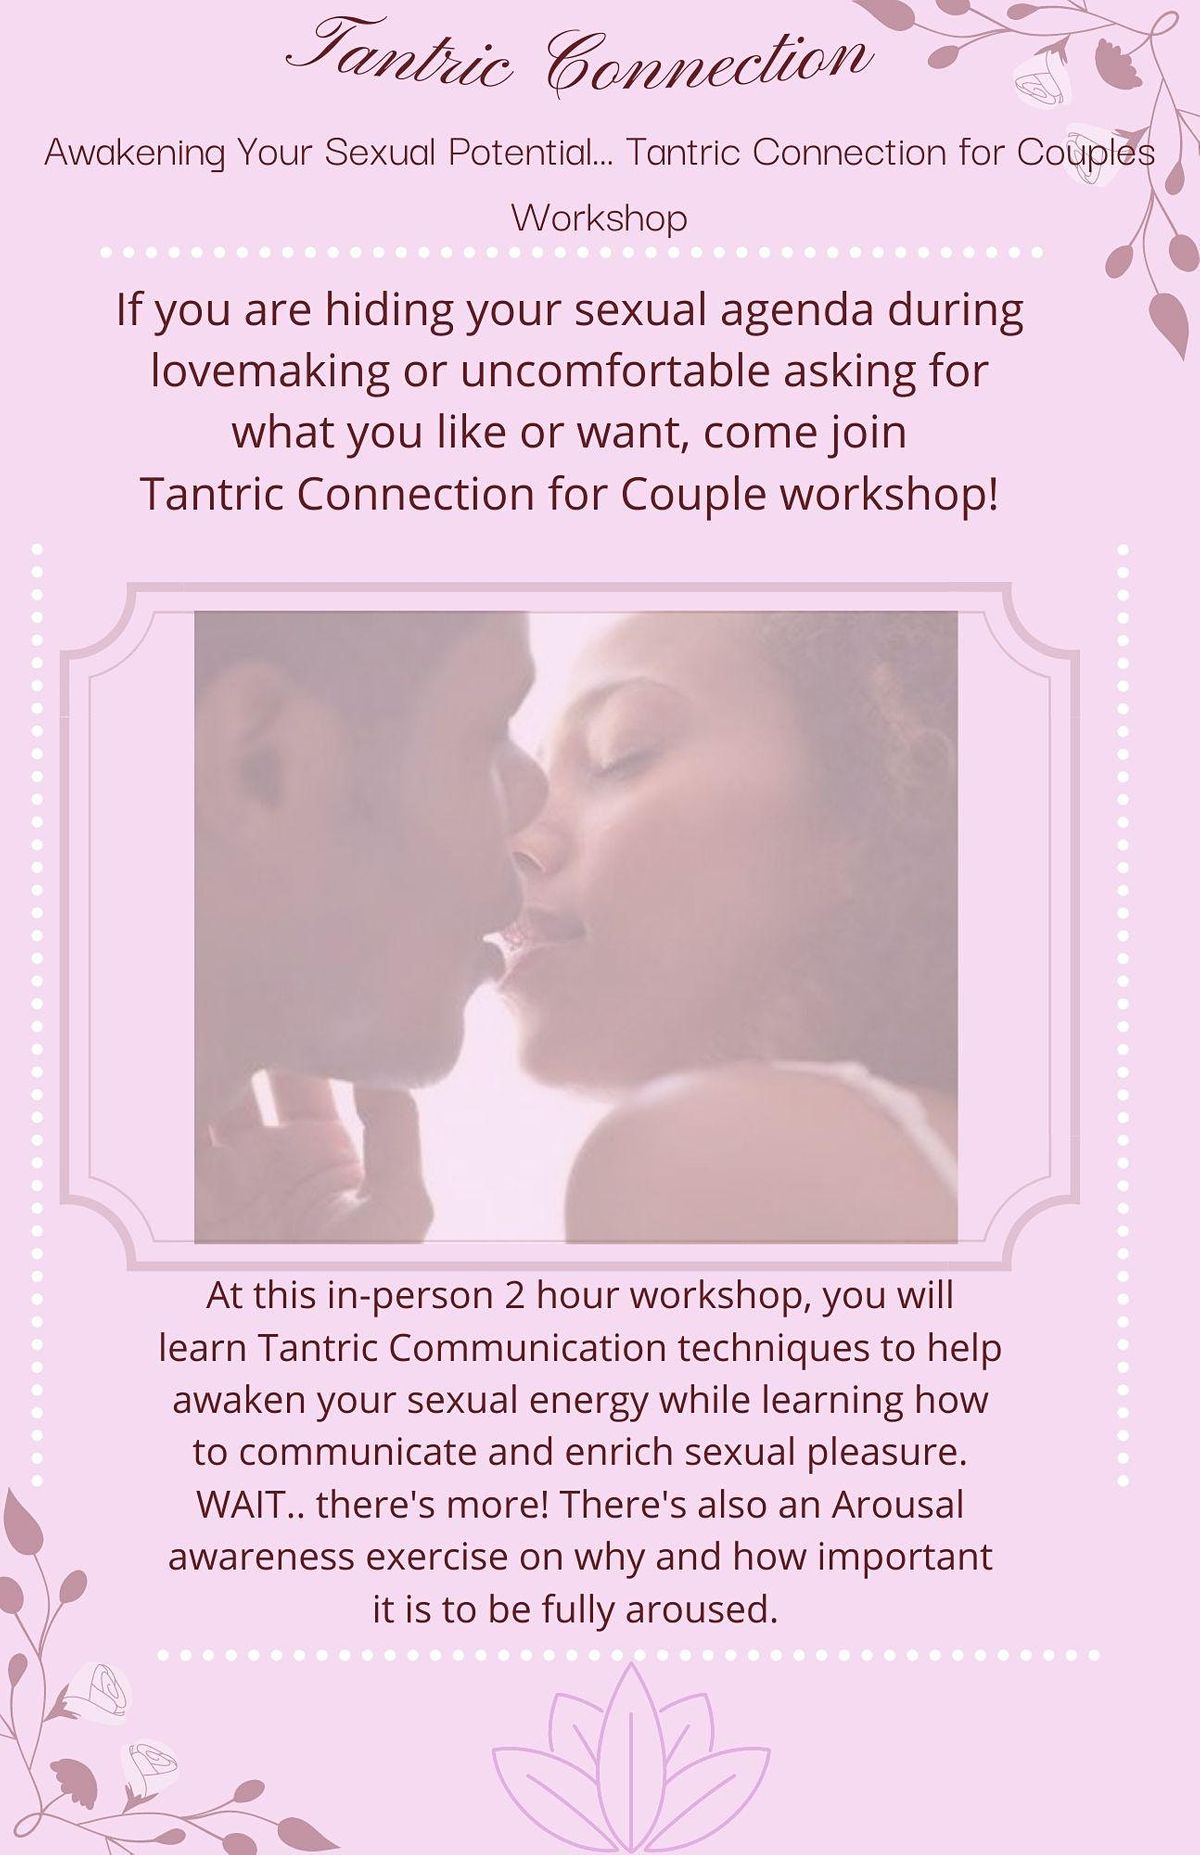 Tantra connection exercise